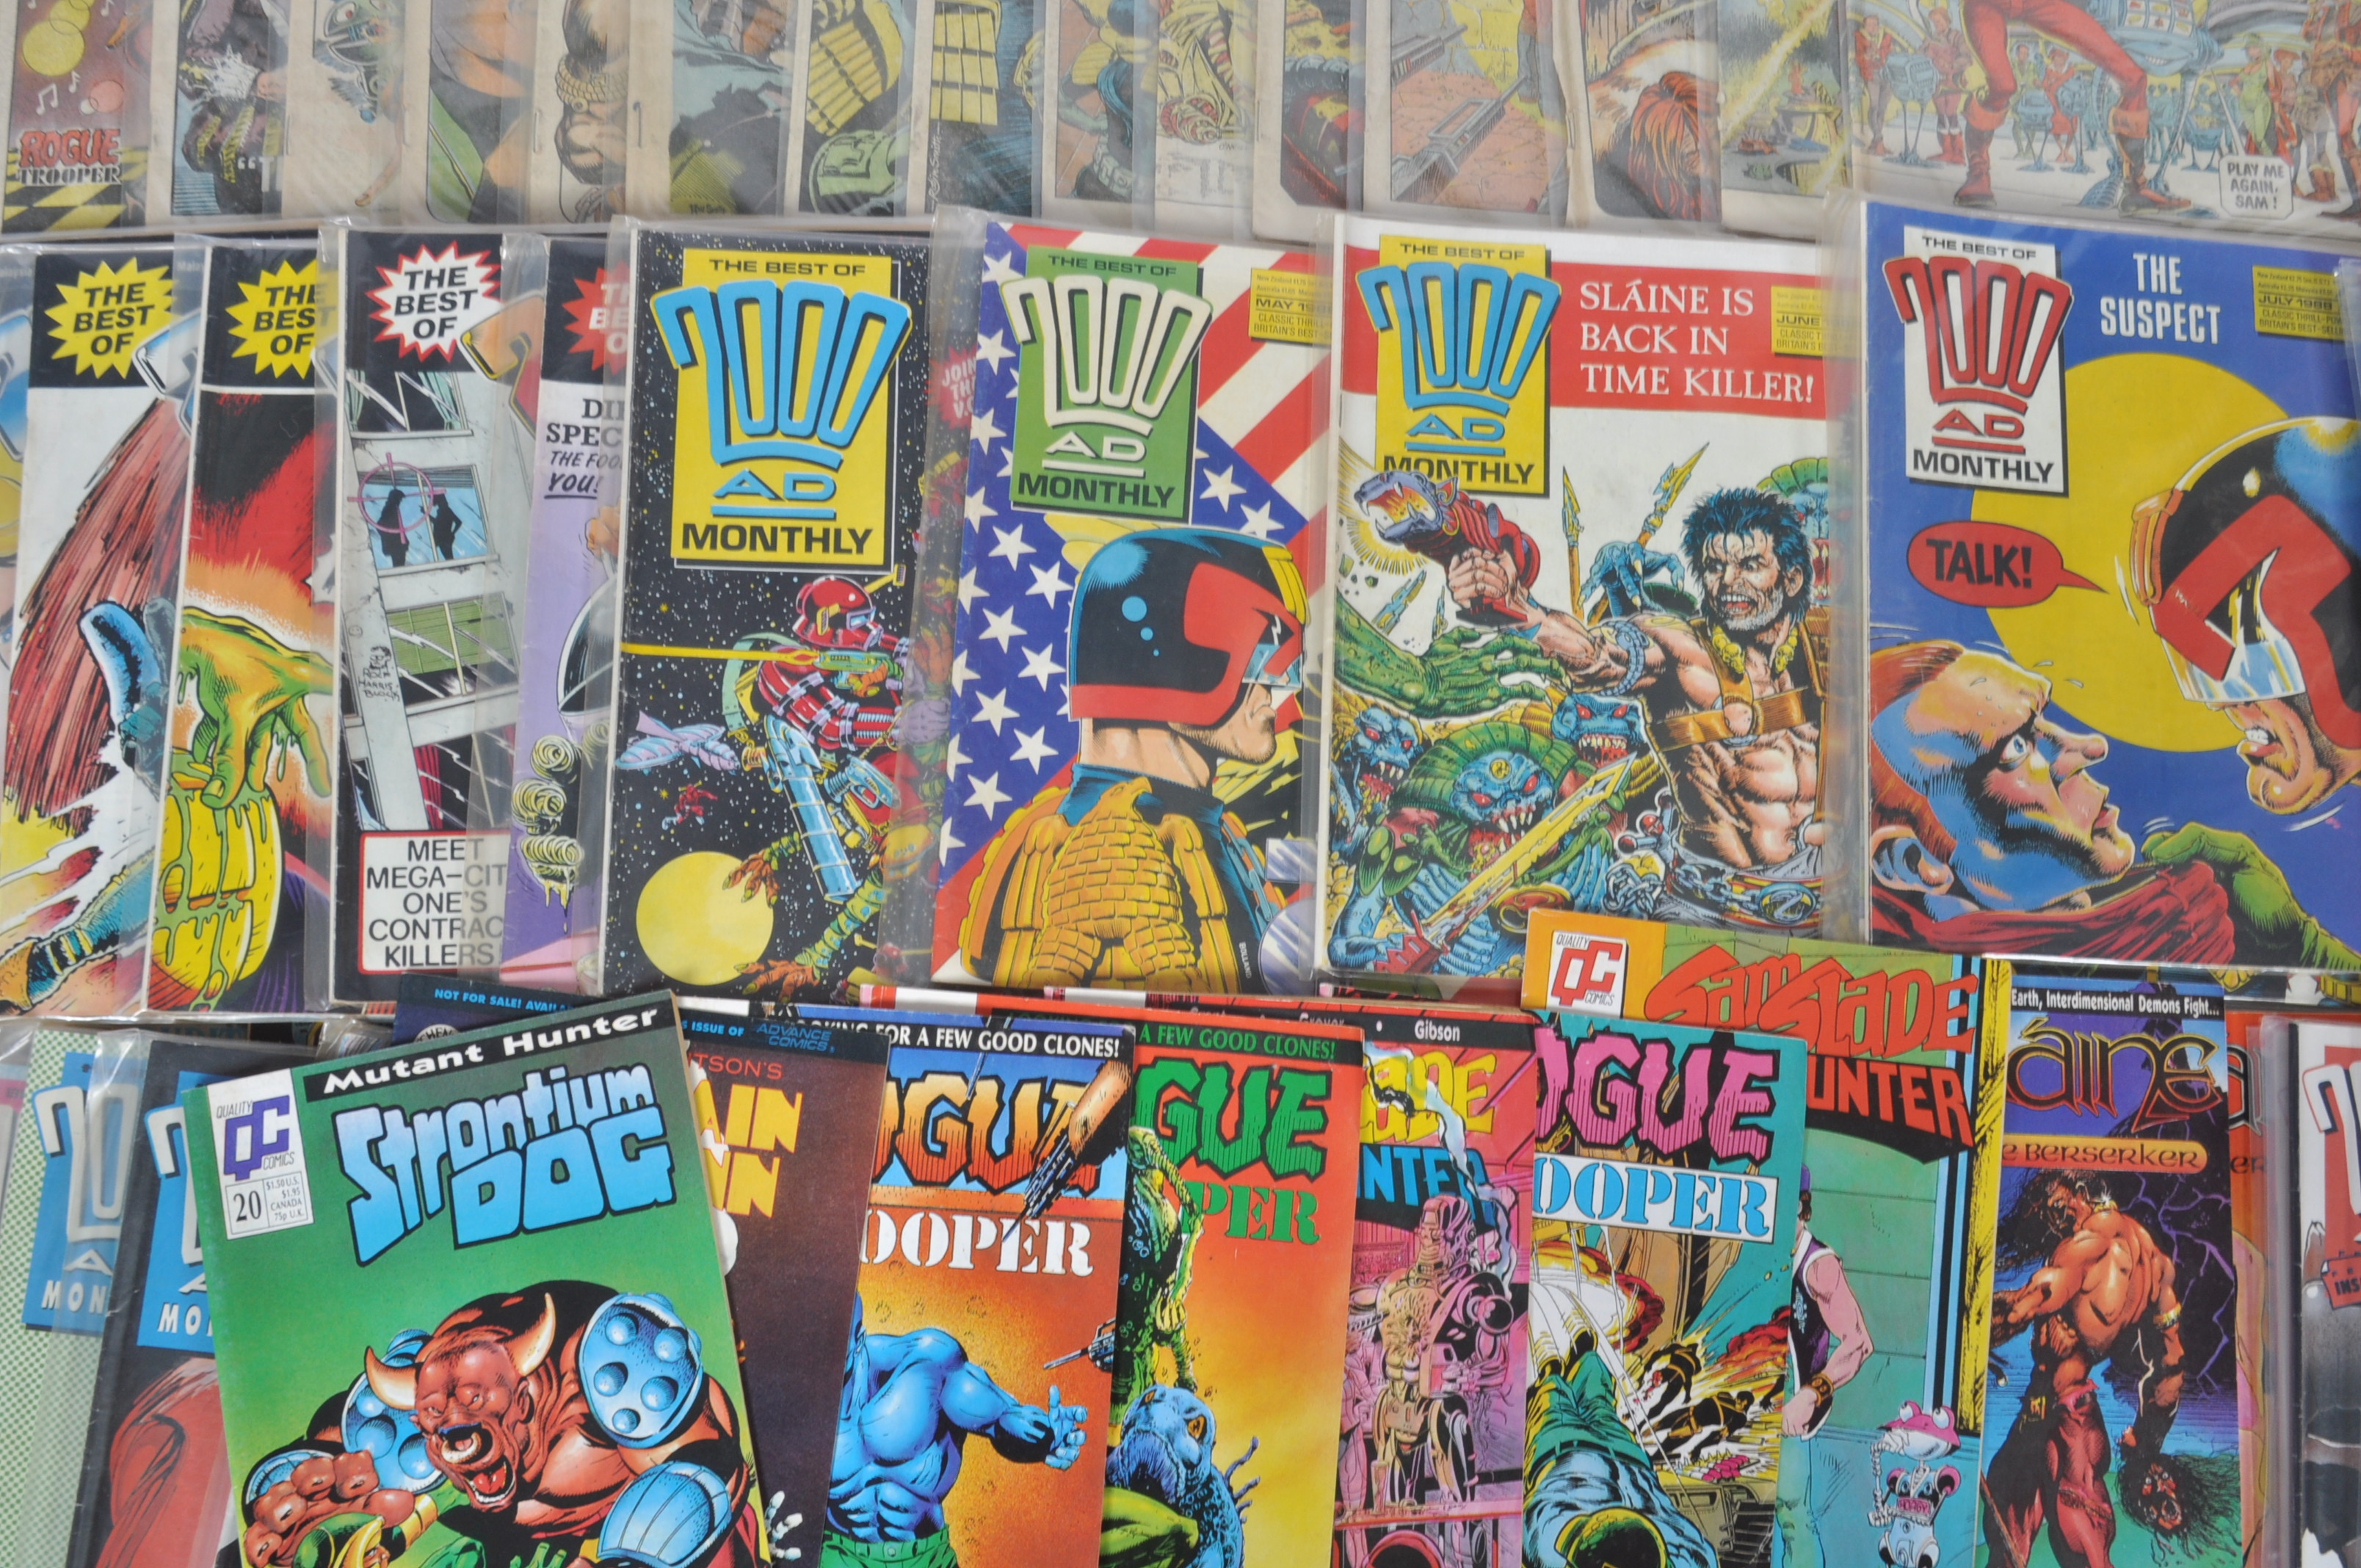 COMIC BOOKS - 2000AD - LARGE COLLECTION OF VINTAGE COMIC BOOKS - Image 15 of 17